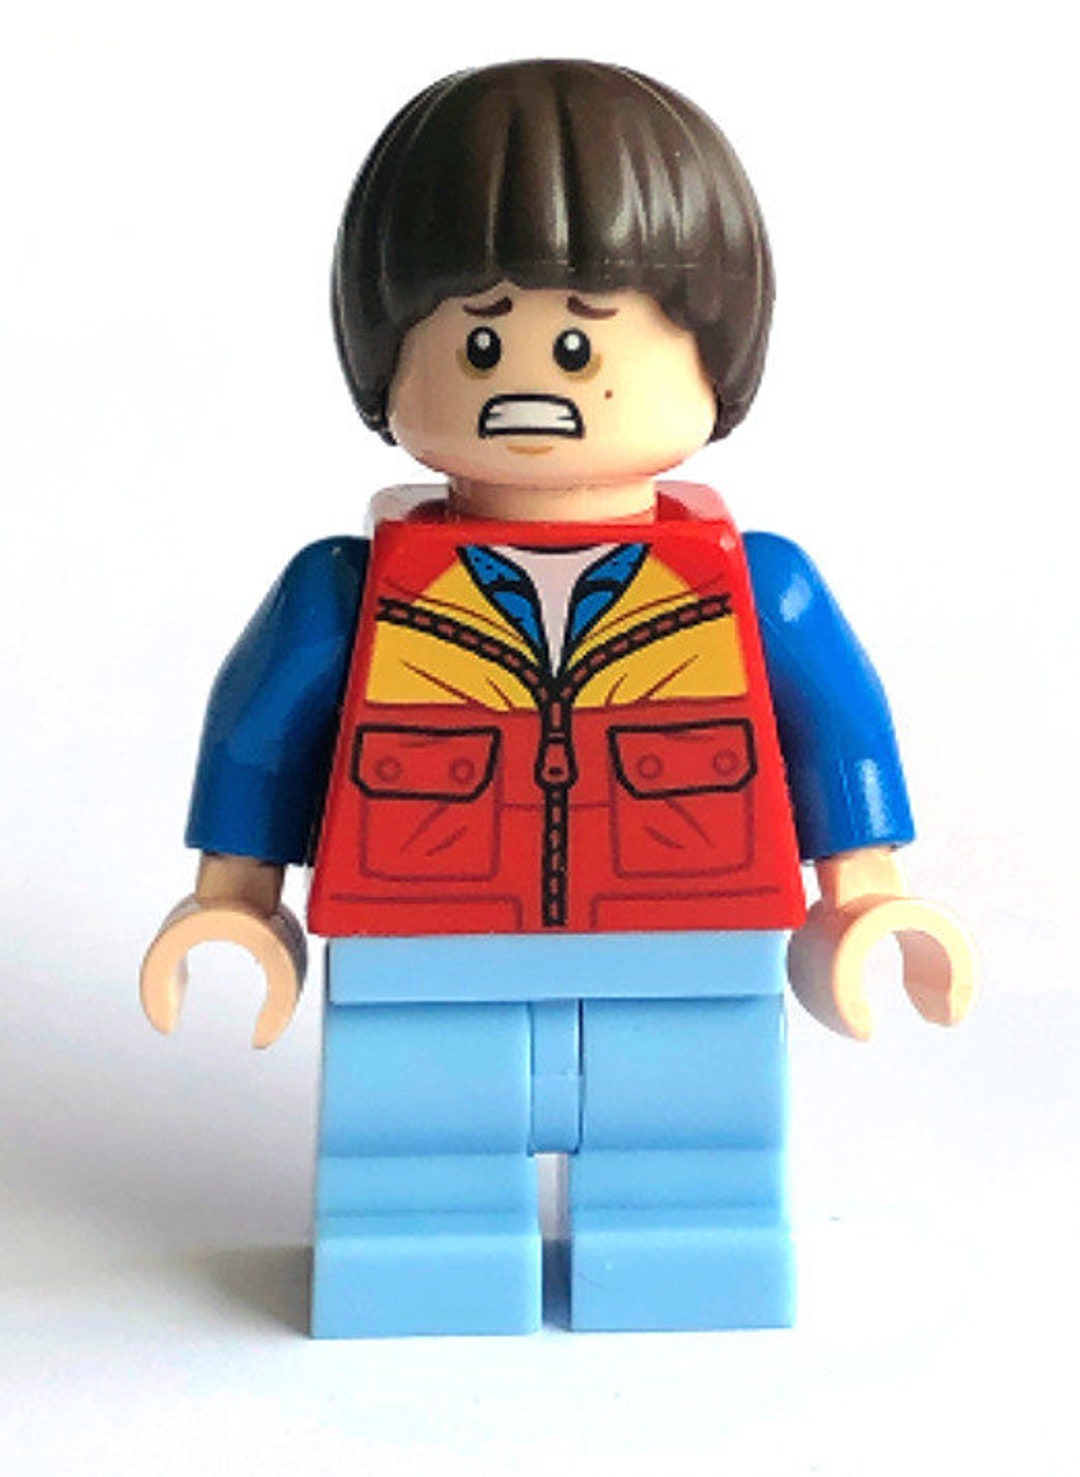 LEGO Stranger Things 75810 The Upside Down WILL BYERS MINIFIGURE with tile